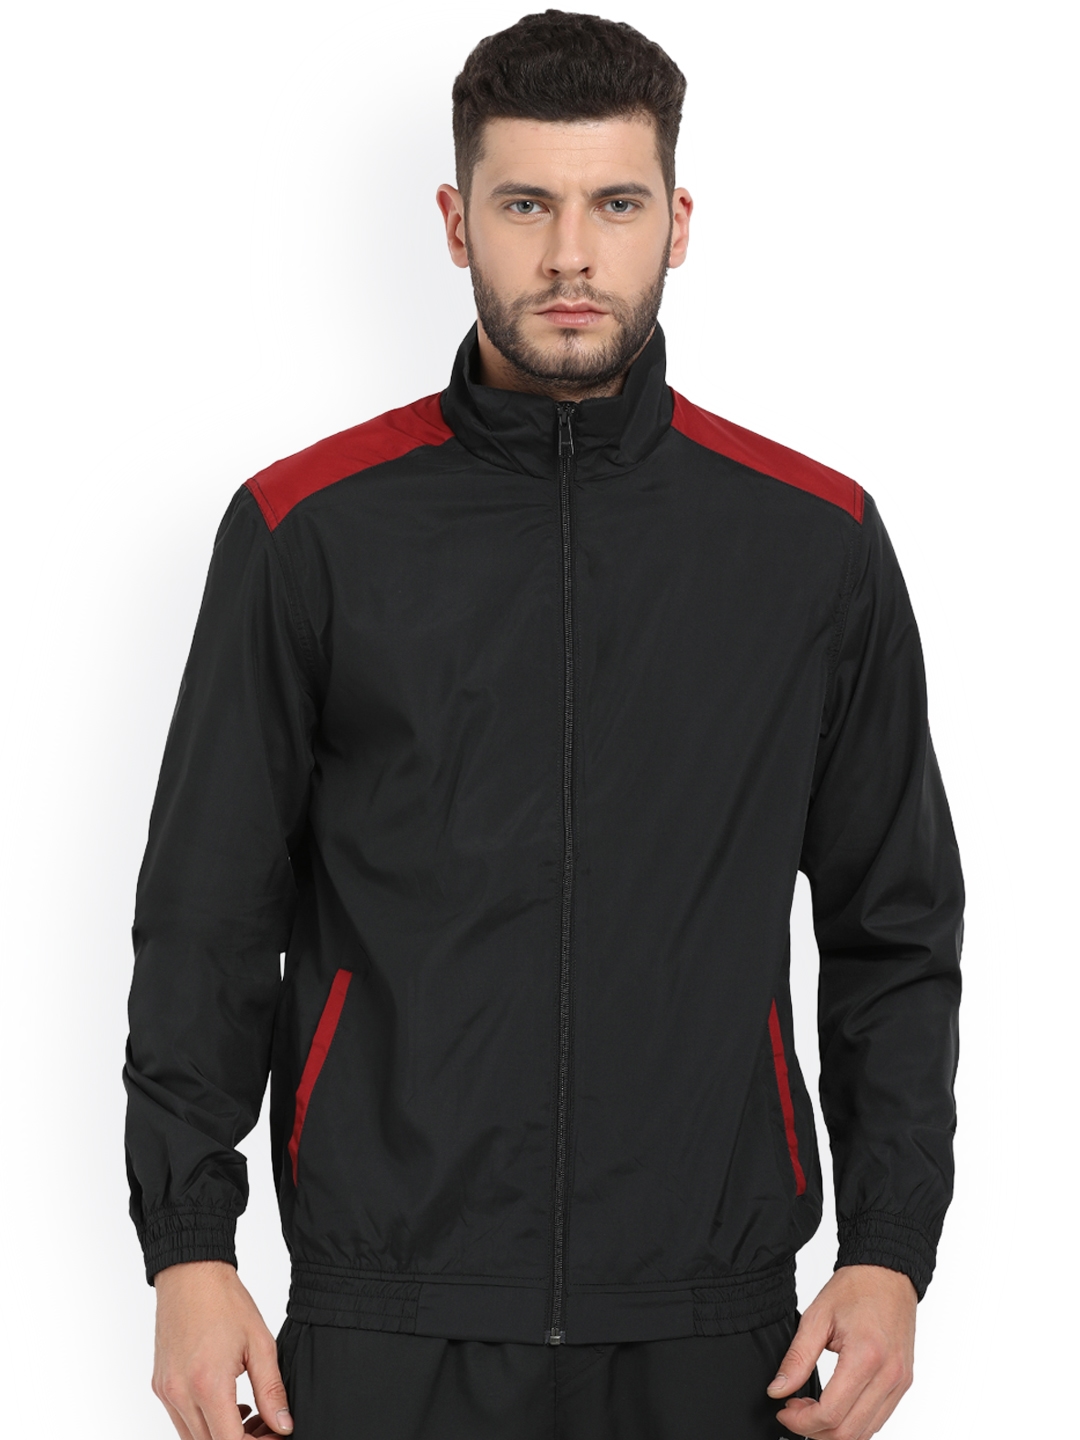 For 1049/-(70% Off) Puma Men Black Solid Sporty Jacket at Myntra